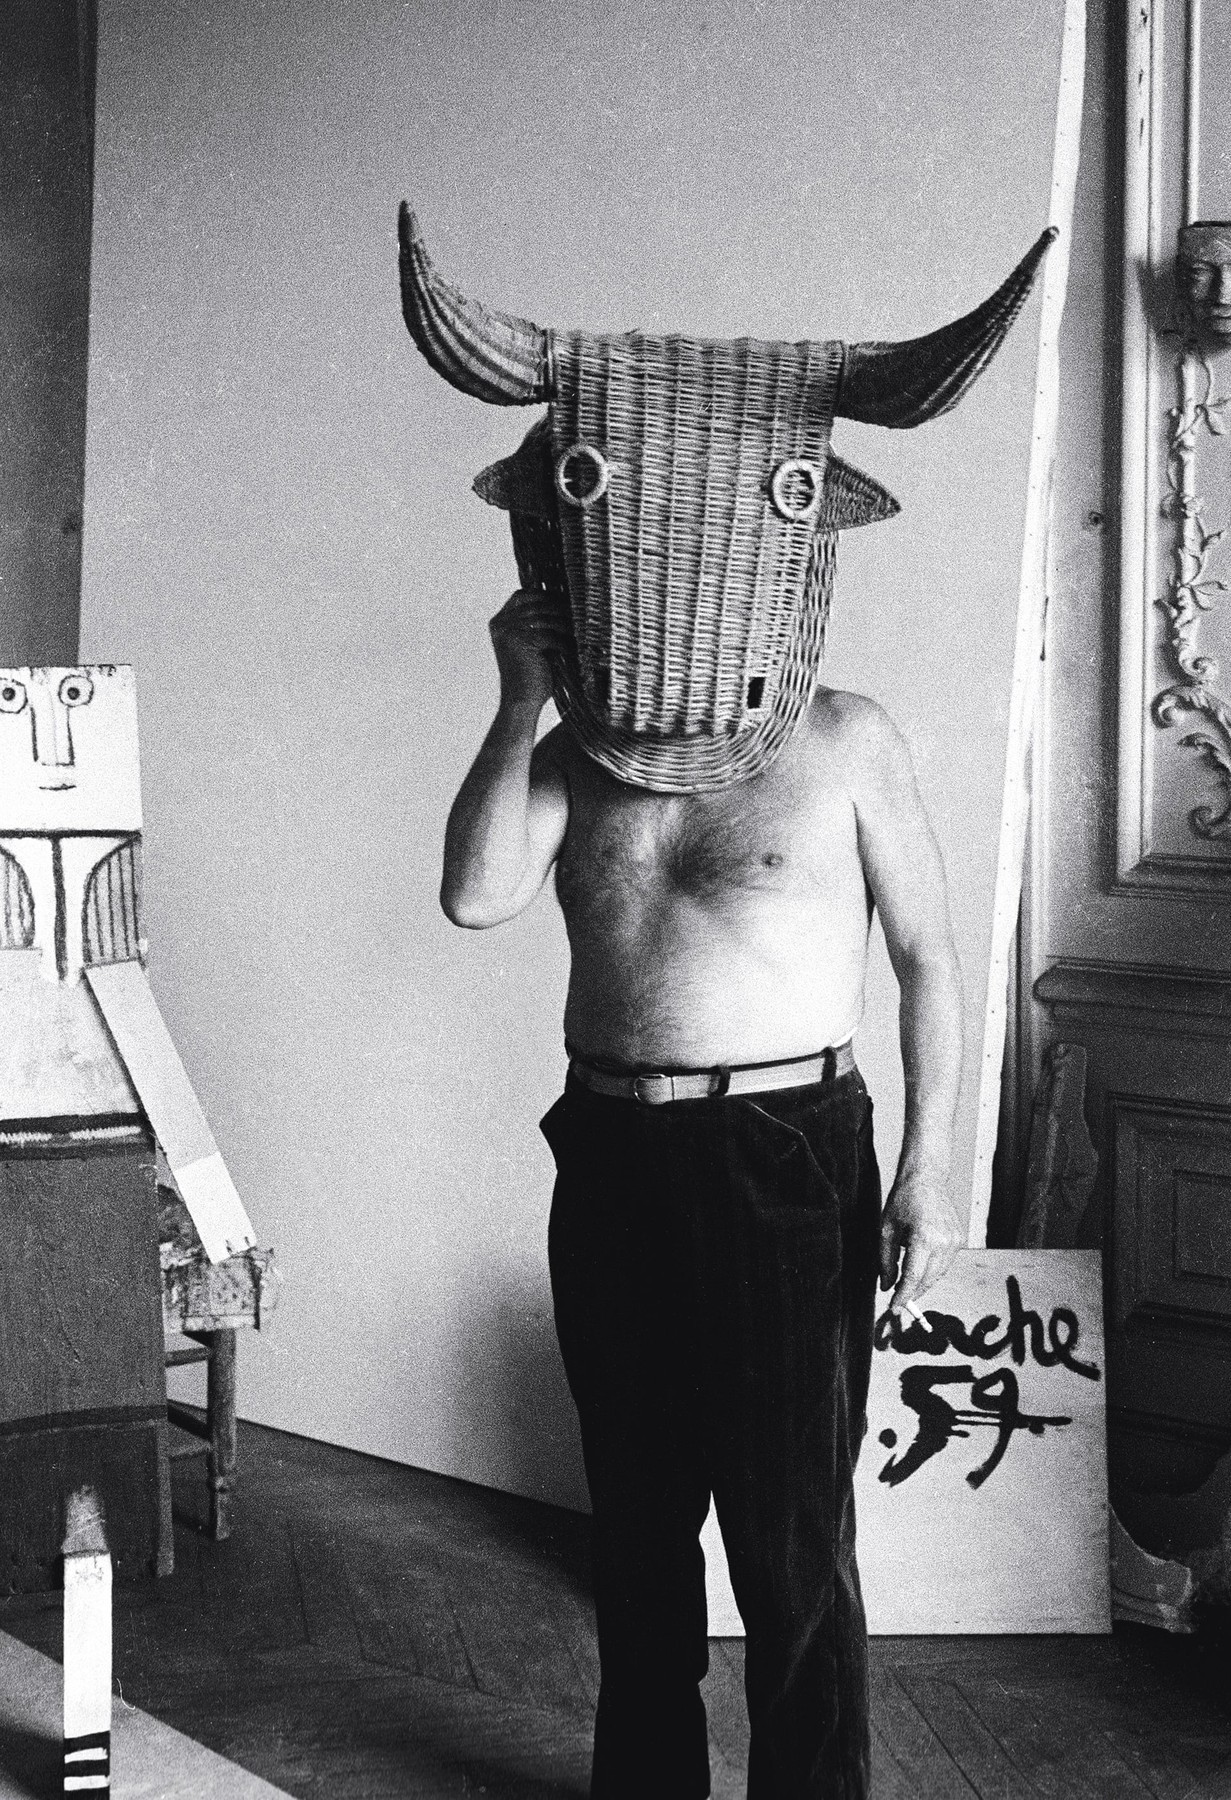 Edward Quinn, Picasso wearing a bull’s head intended for bullfighter's training, La Californie, Cannes, 1959.